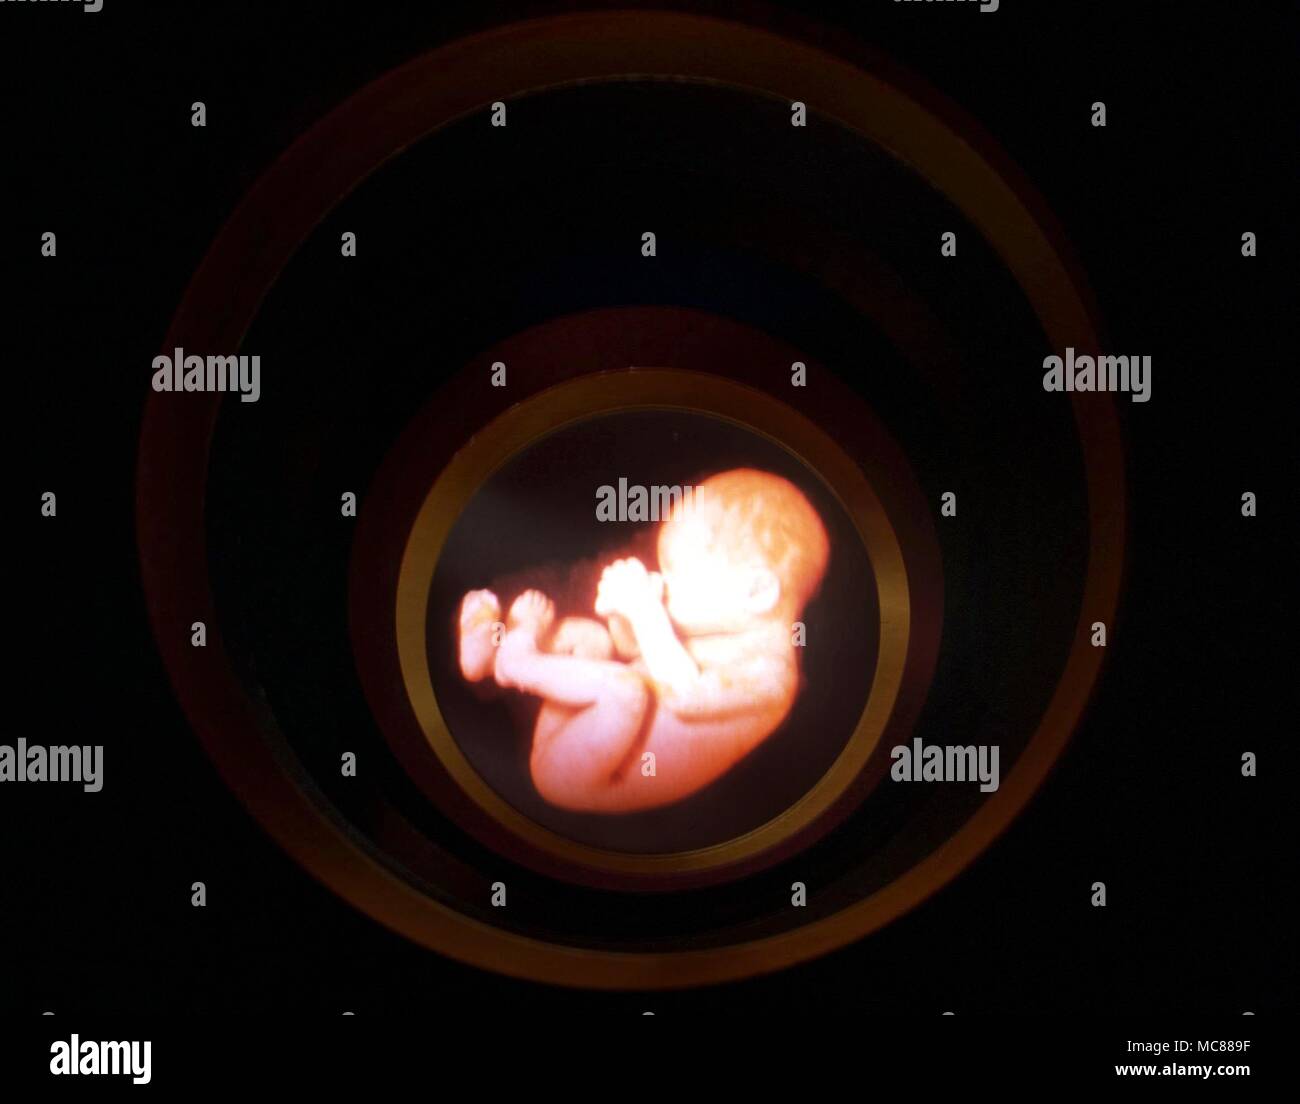 Reincarnation The embryo as representation of the spirit descending into incarnation from the spiritual realms Stock Photo